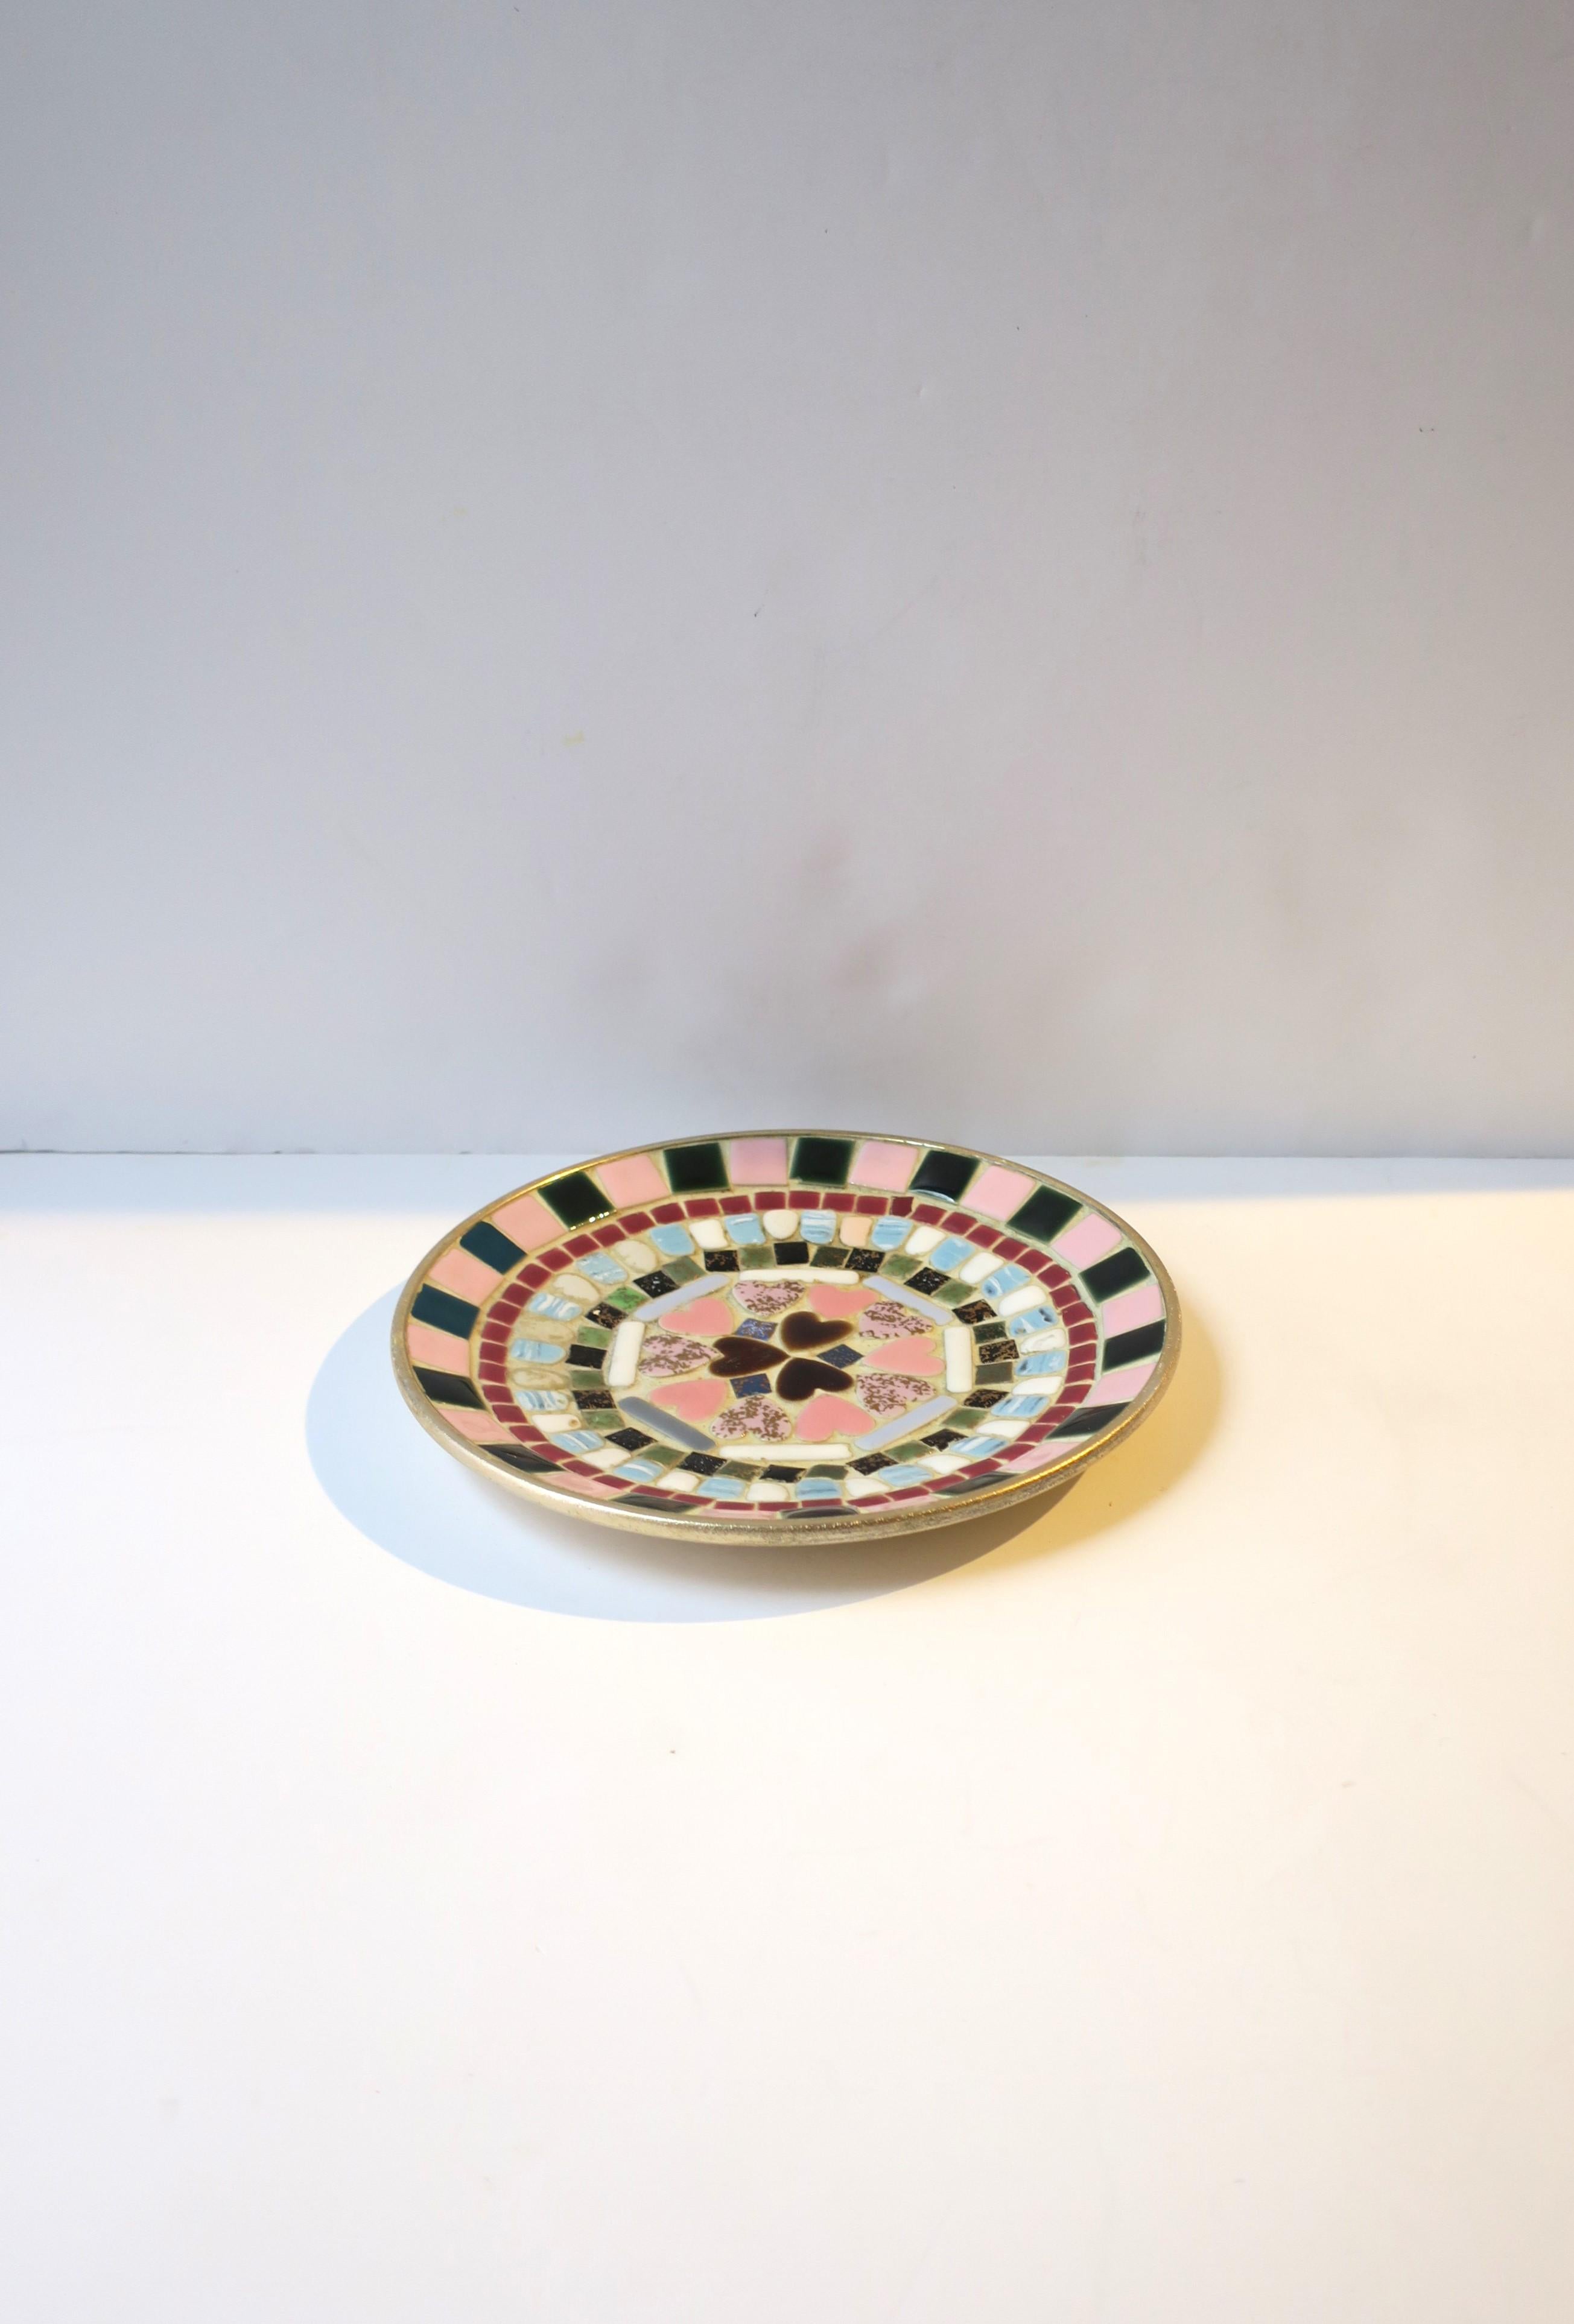 American Ceramic Tile Mosaic Dish Vide-Poche with Pink Hearts, circa Mid-20th Century For Sale